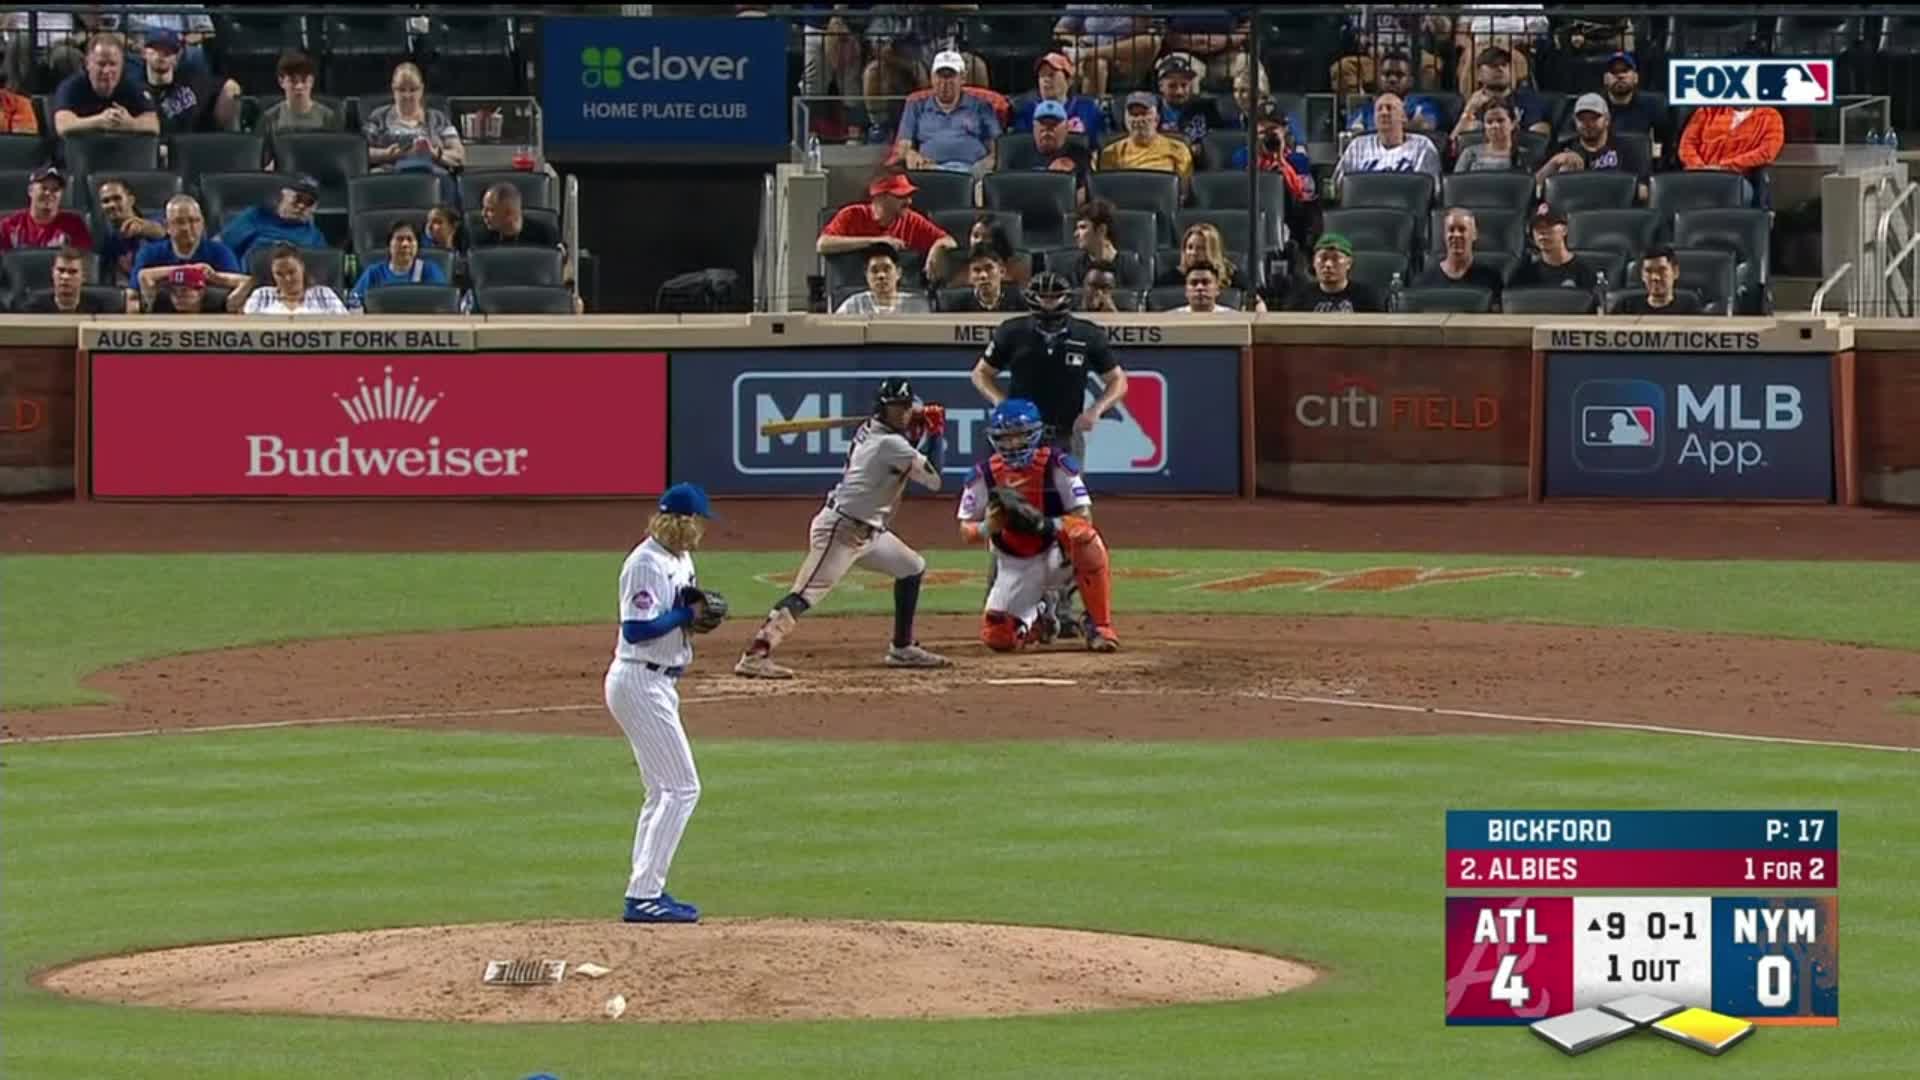 Ozzie Albies' 420 ft home run gives the Braves a 6-0 lead over the Mets.